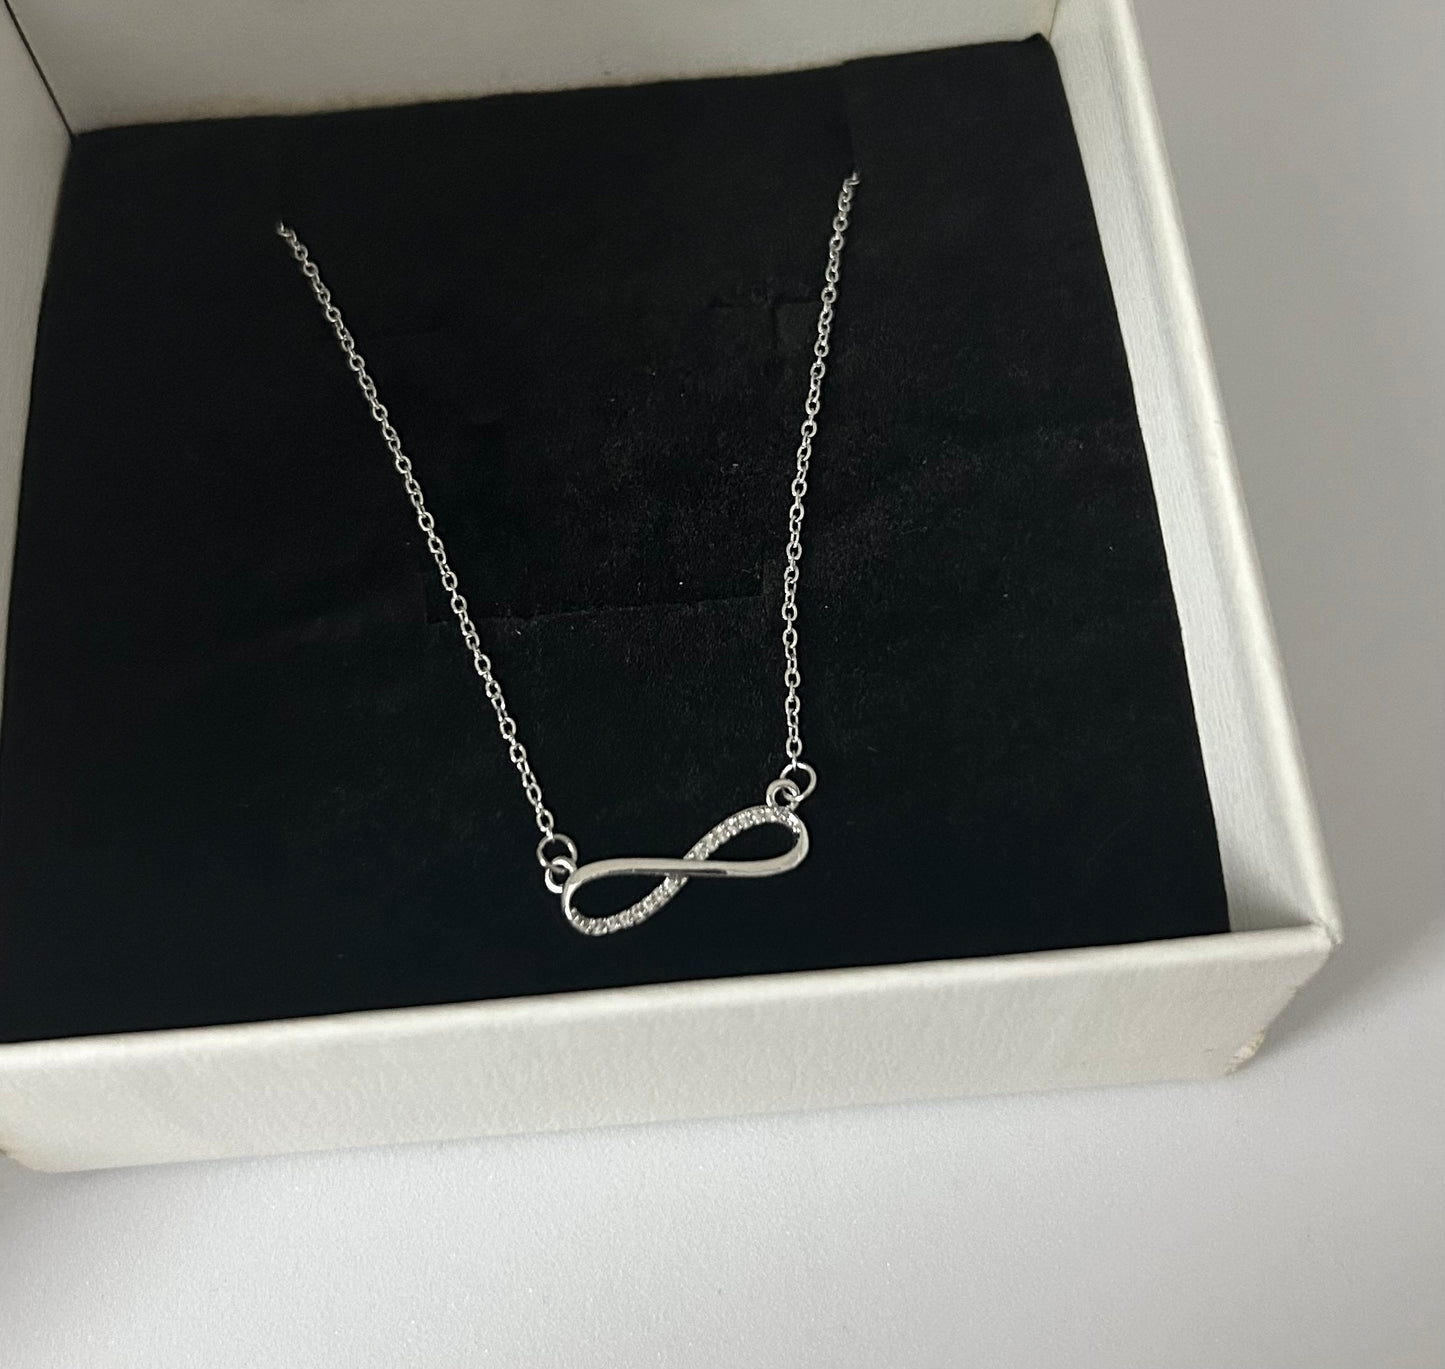 Infinity 3.0 necklace